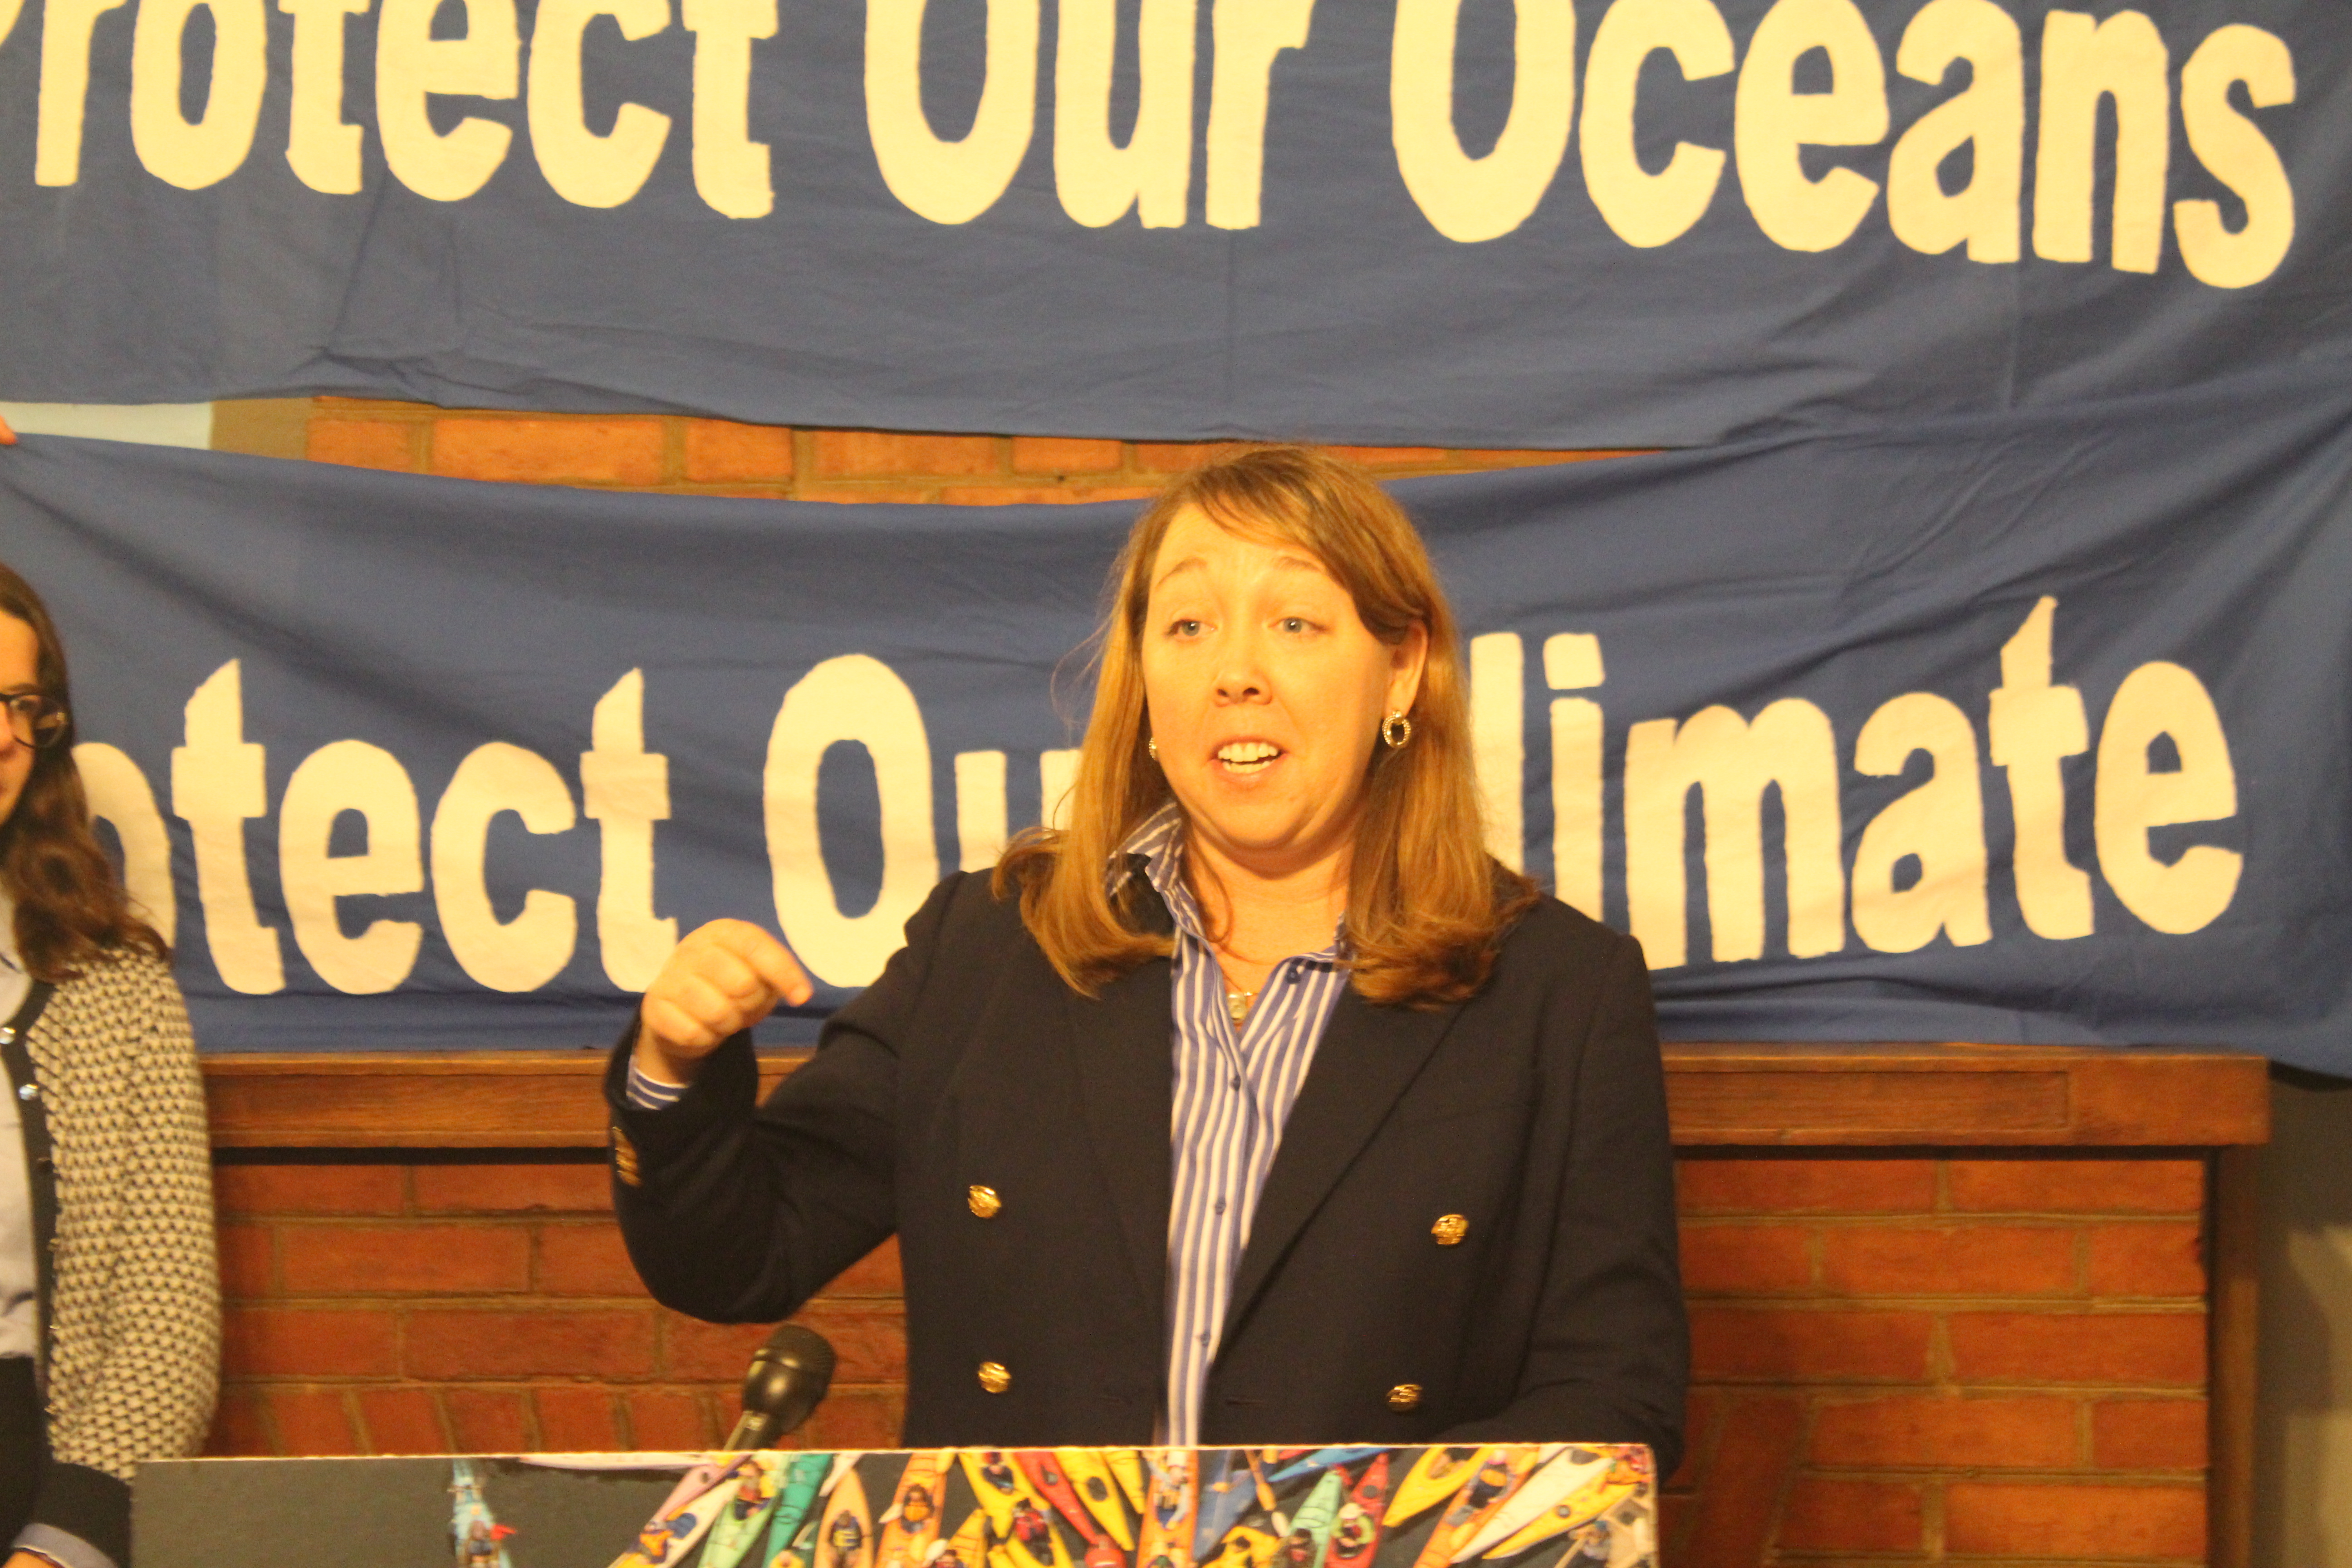 Speaker shares her personal account of the negative impacts of offshore drilling.